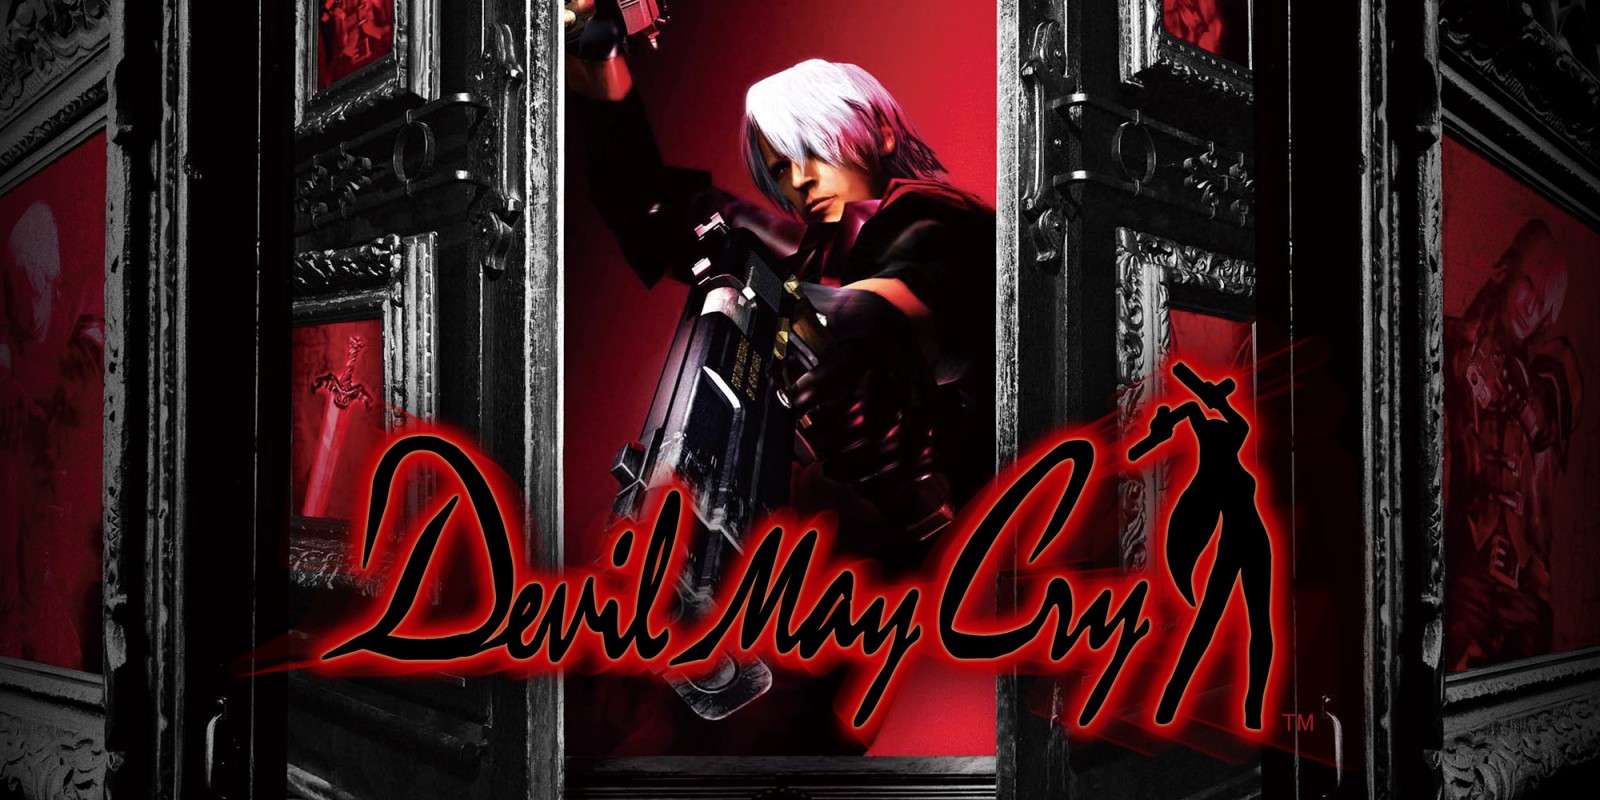 Devil-May-Cry